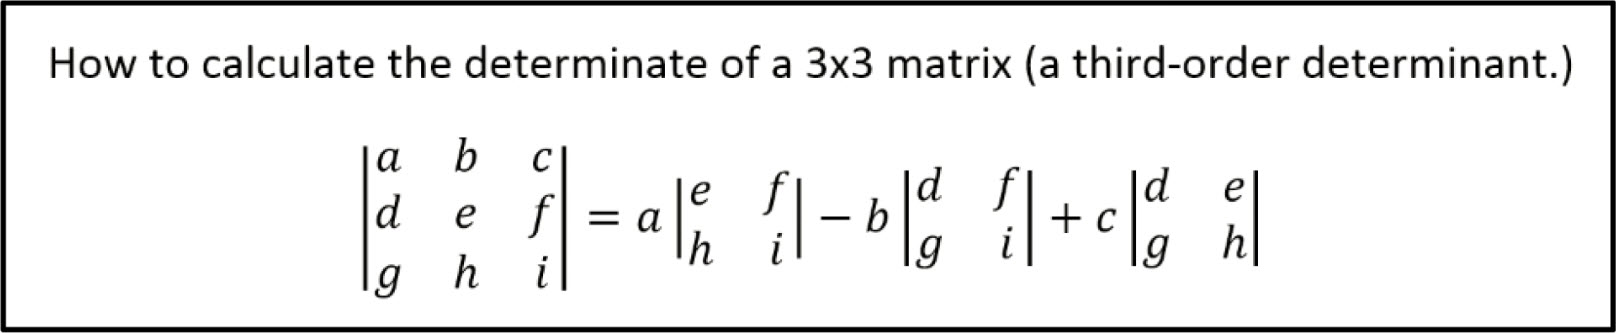 Notes for how to calculate a 3x3 determinant